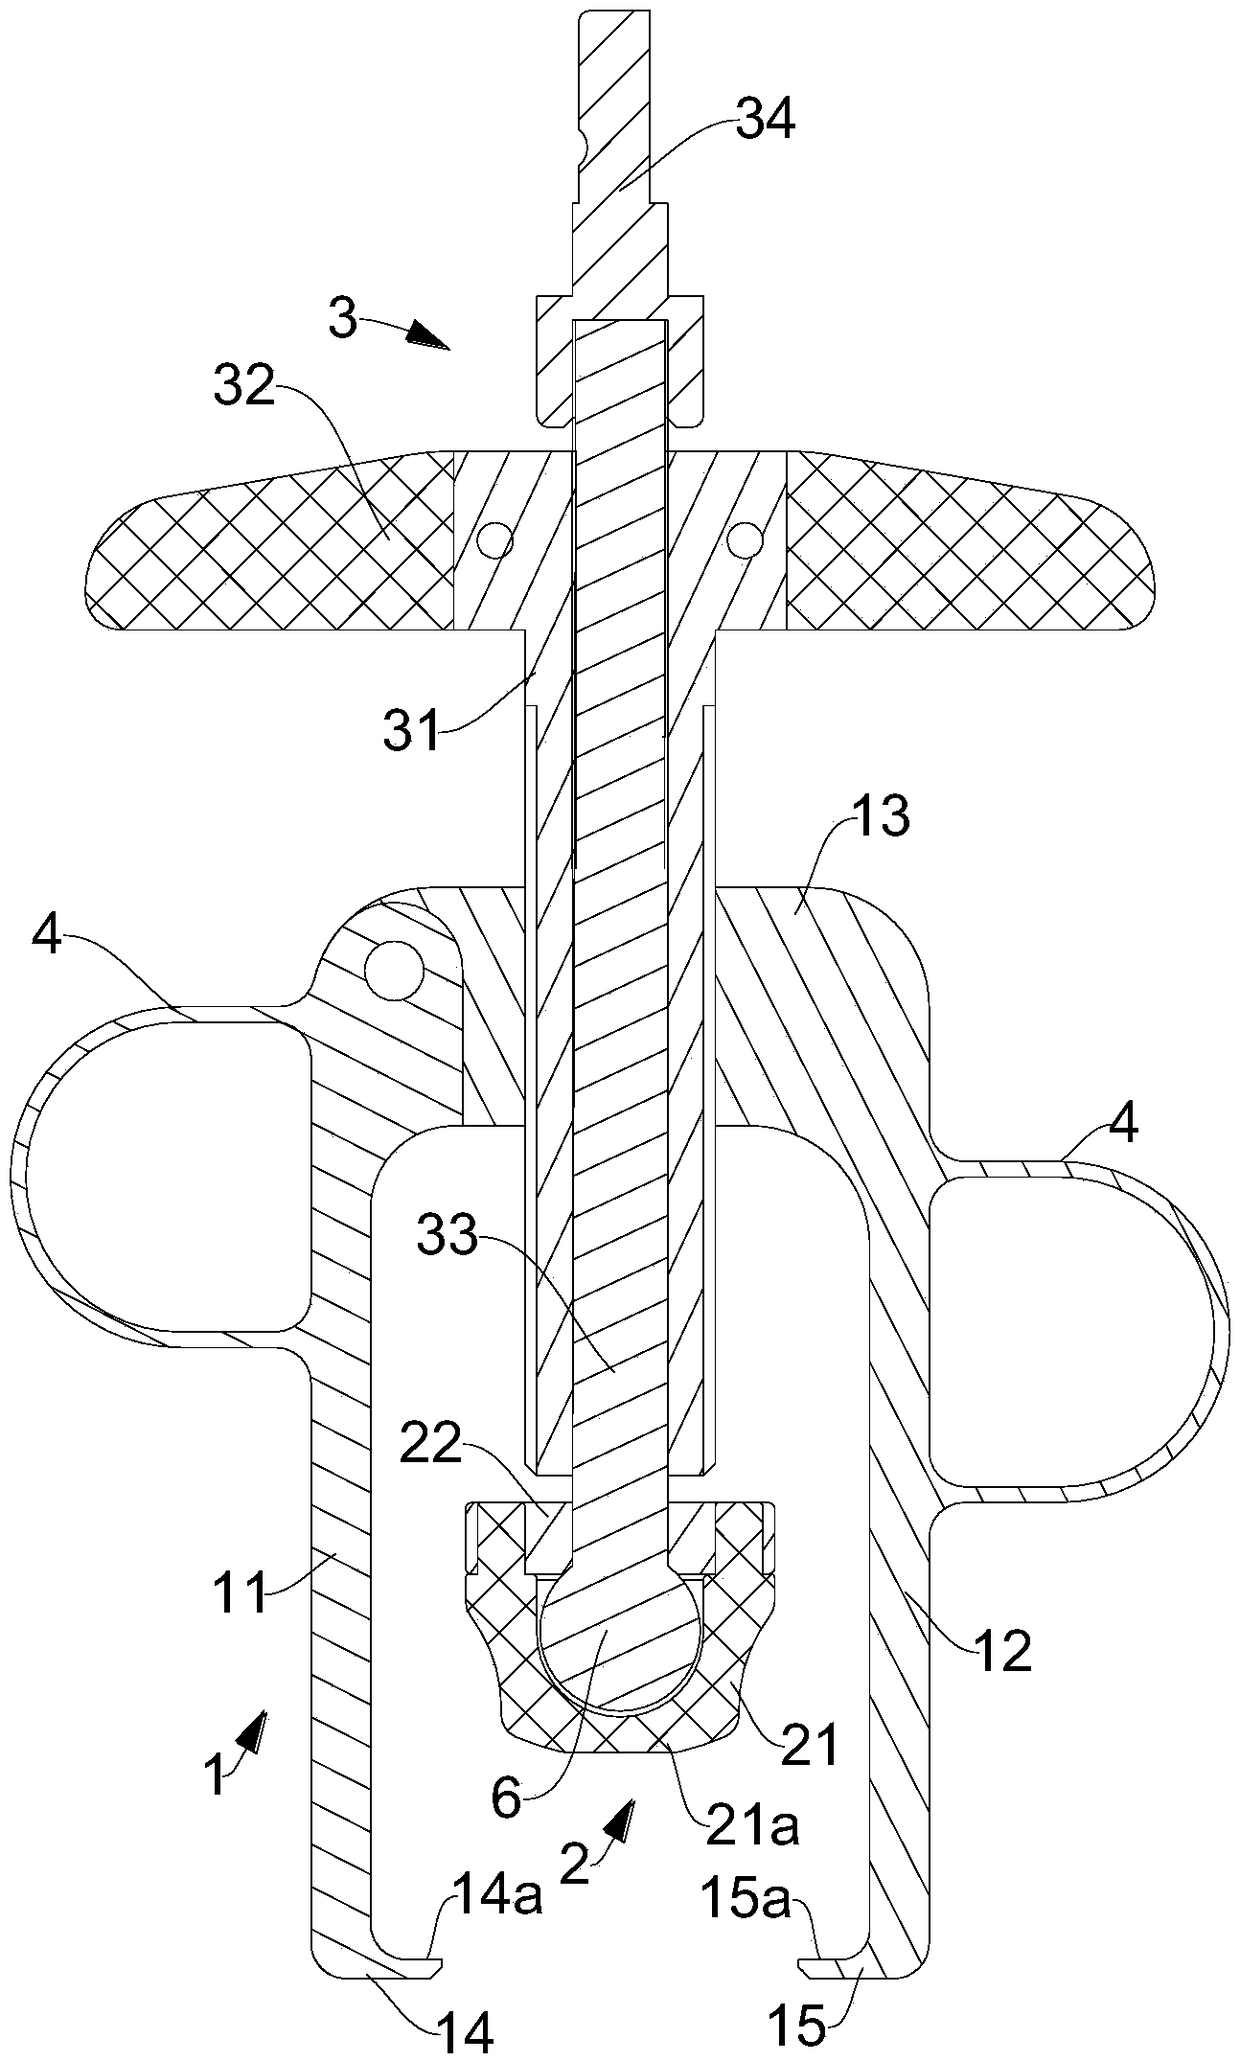 Press-fitting tool for inverted shoulder joint prosthesis